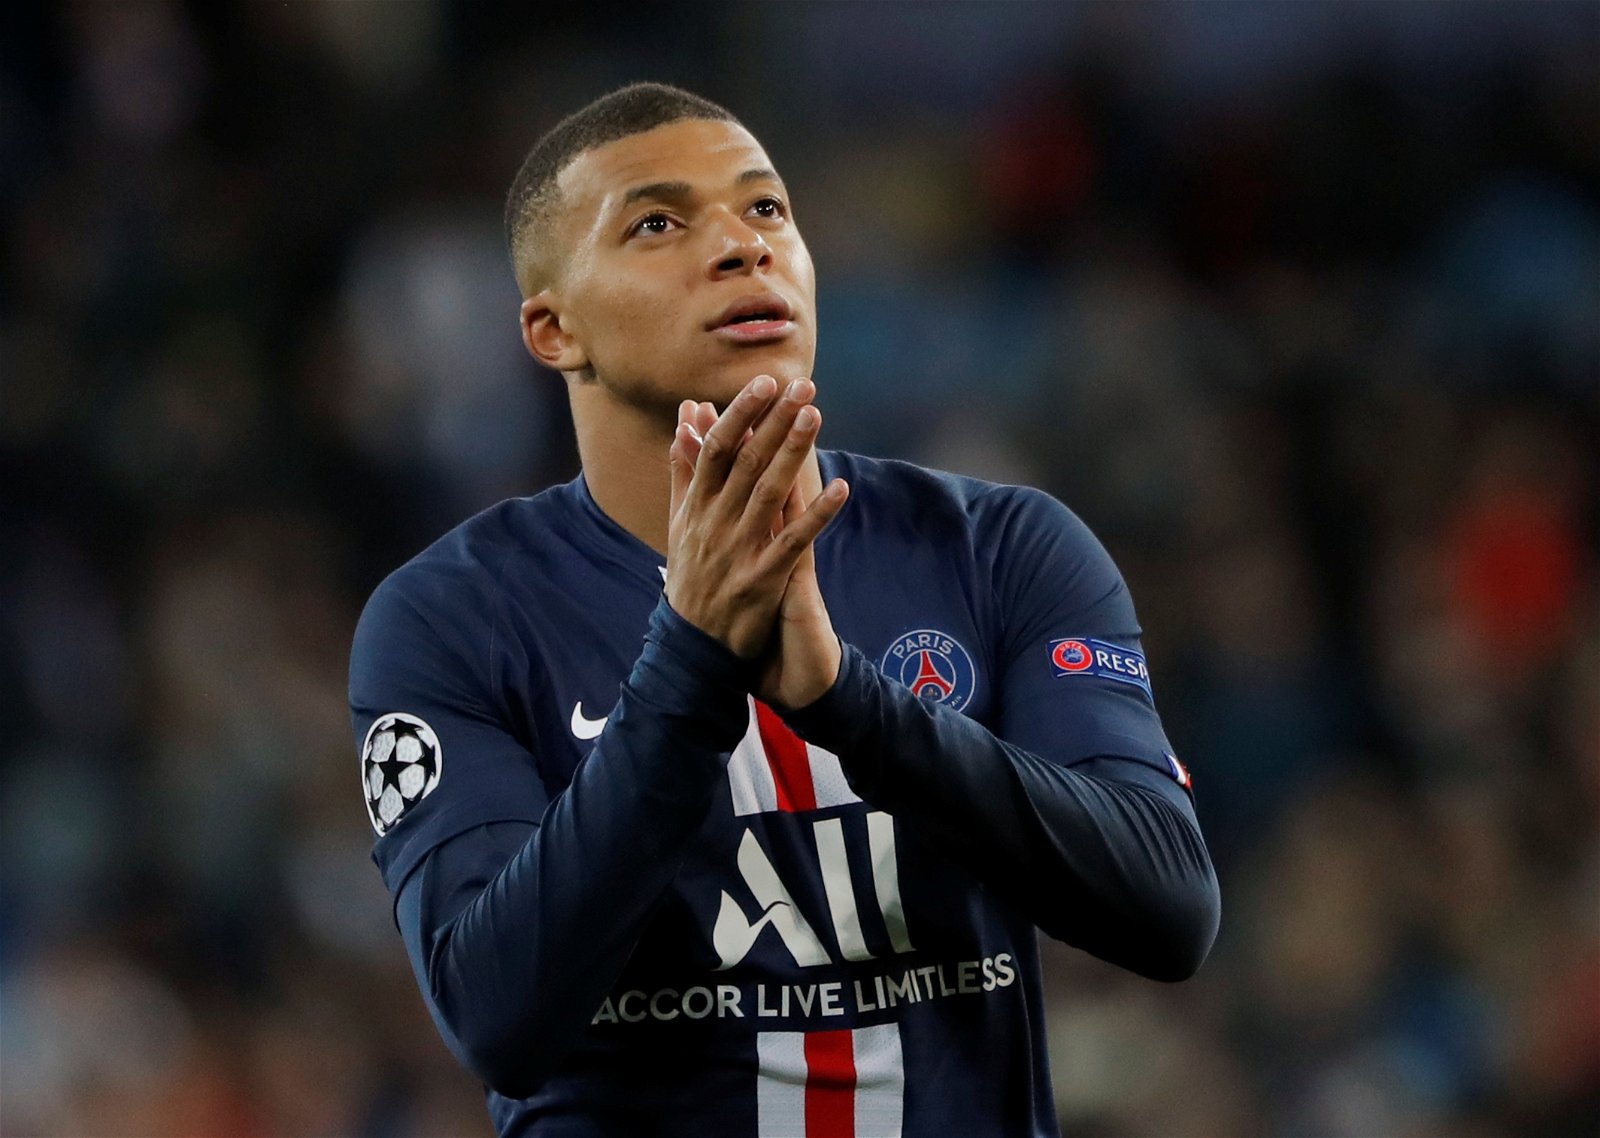 Mbappe Net Worth: What Is Mbappe Net Worth?